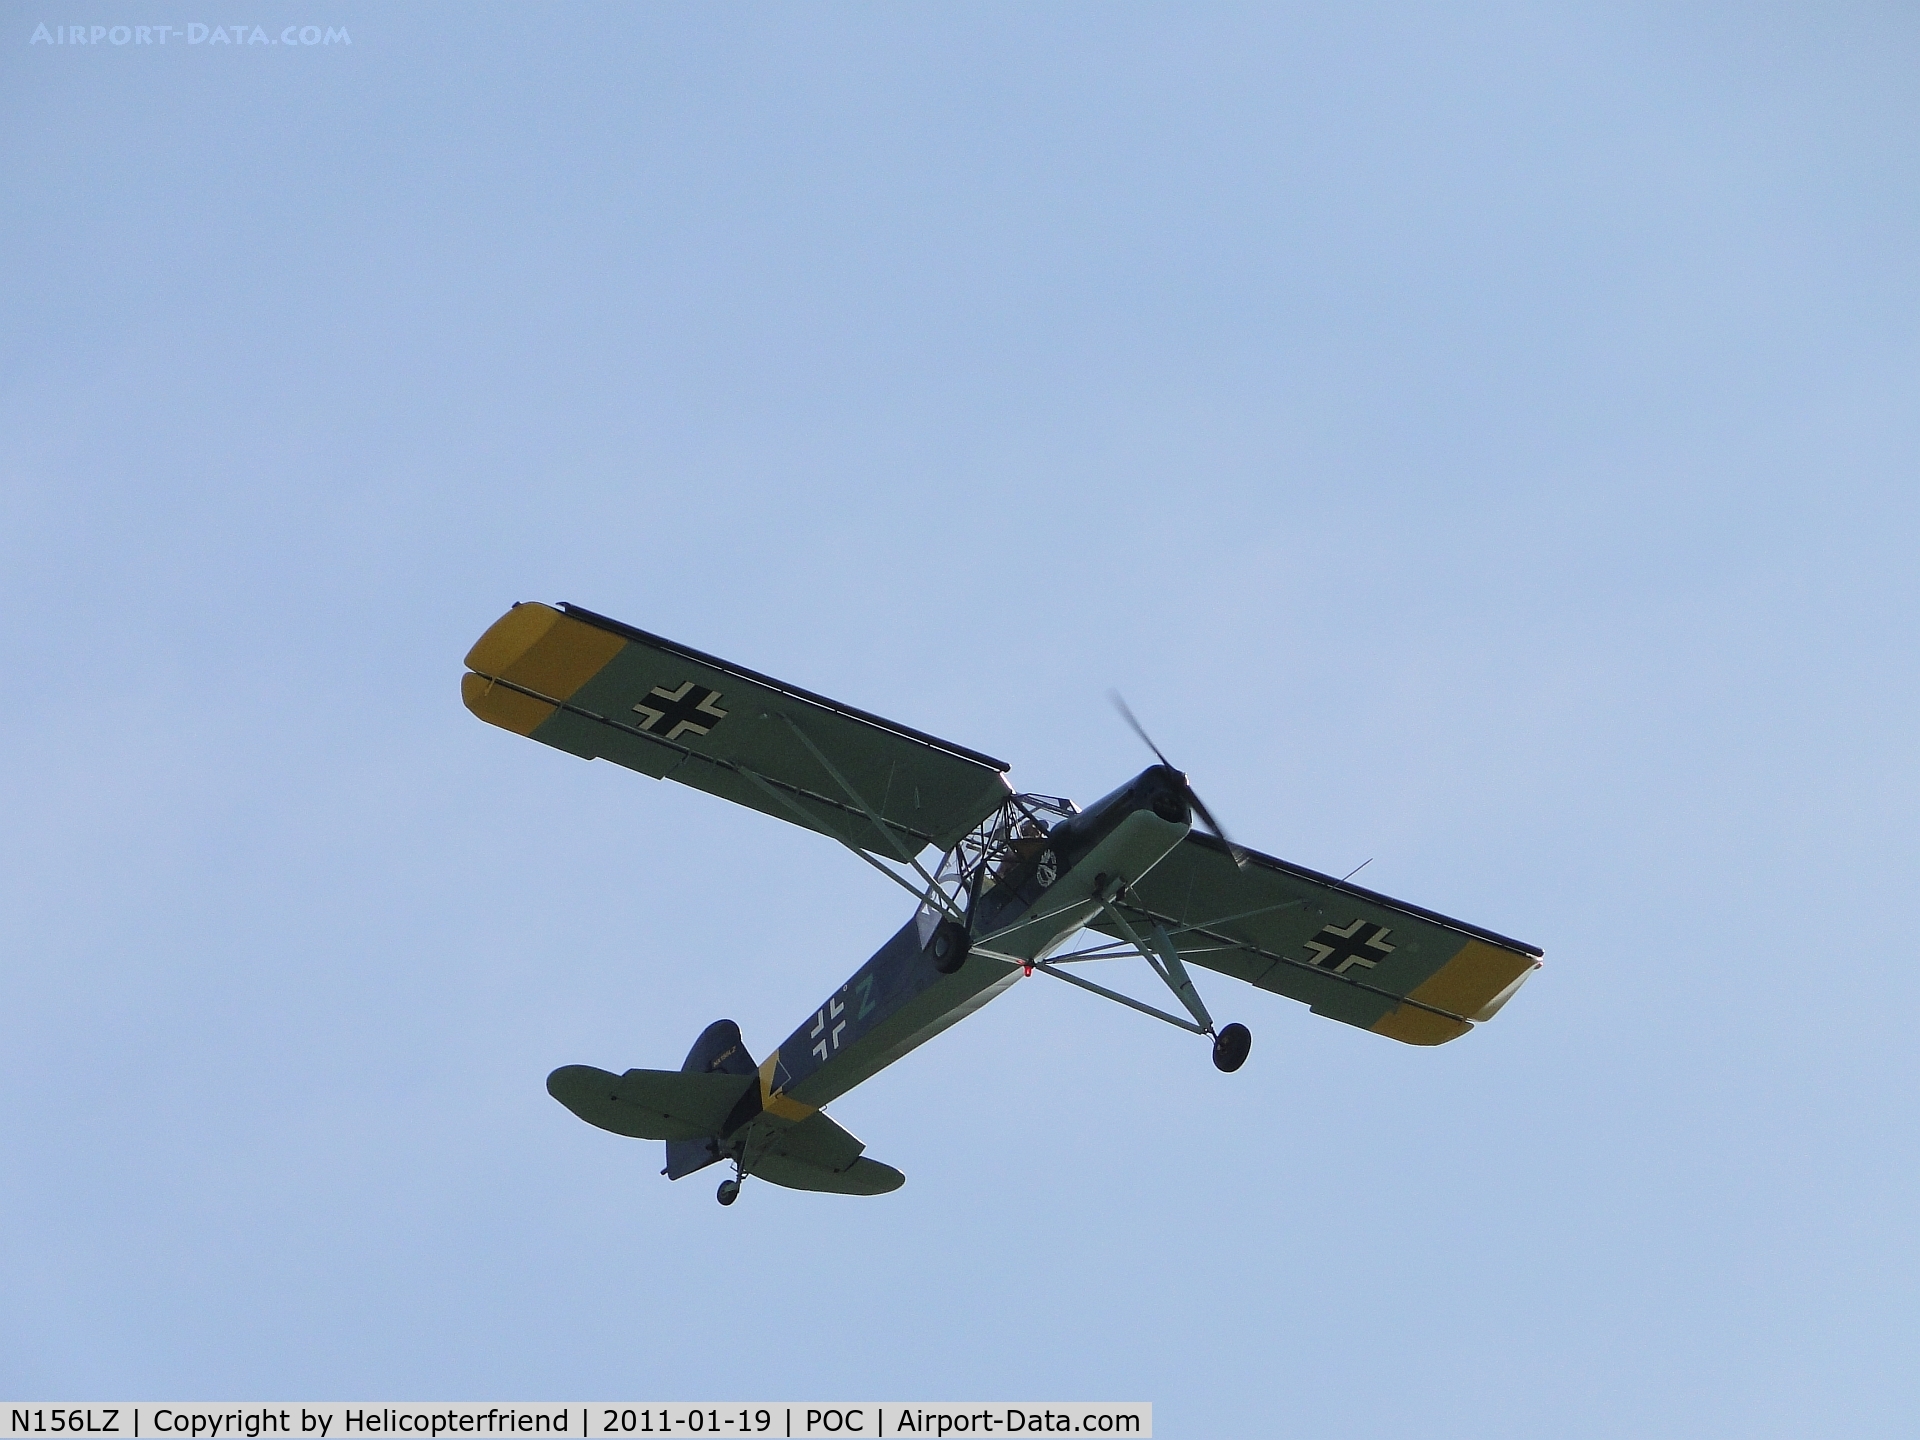 N156LZ, 2009 Fieseler Fi-156C Storch Replica C/N SA-001K, After short rollout from landing, ship is airbourne and climbing out to go around